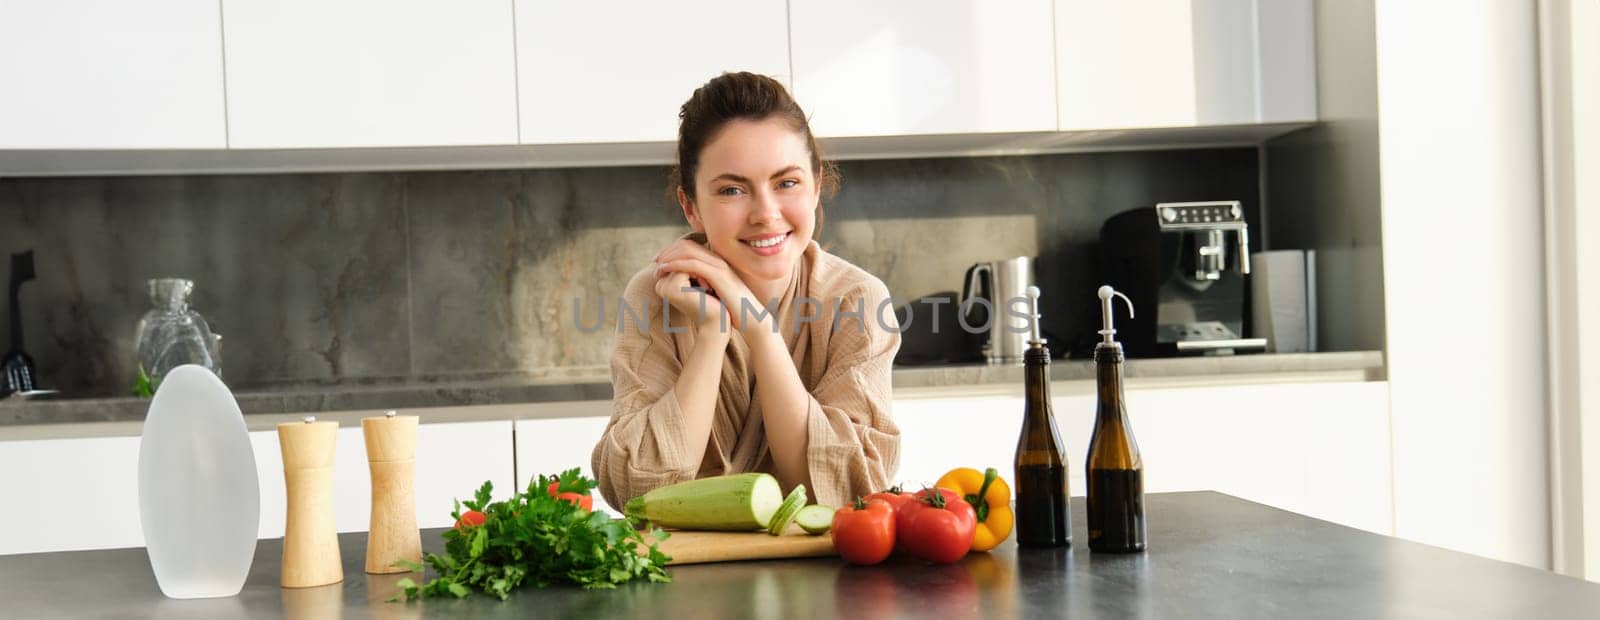 Portrait of smiling young woman cooking in kitchen in cosy clothes, standing near counter with chopping board, vegetables, zucchini, preparing dinner for family, making salad.